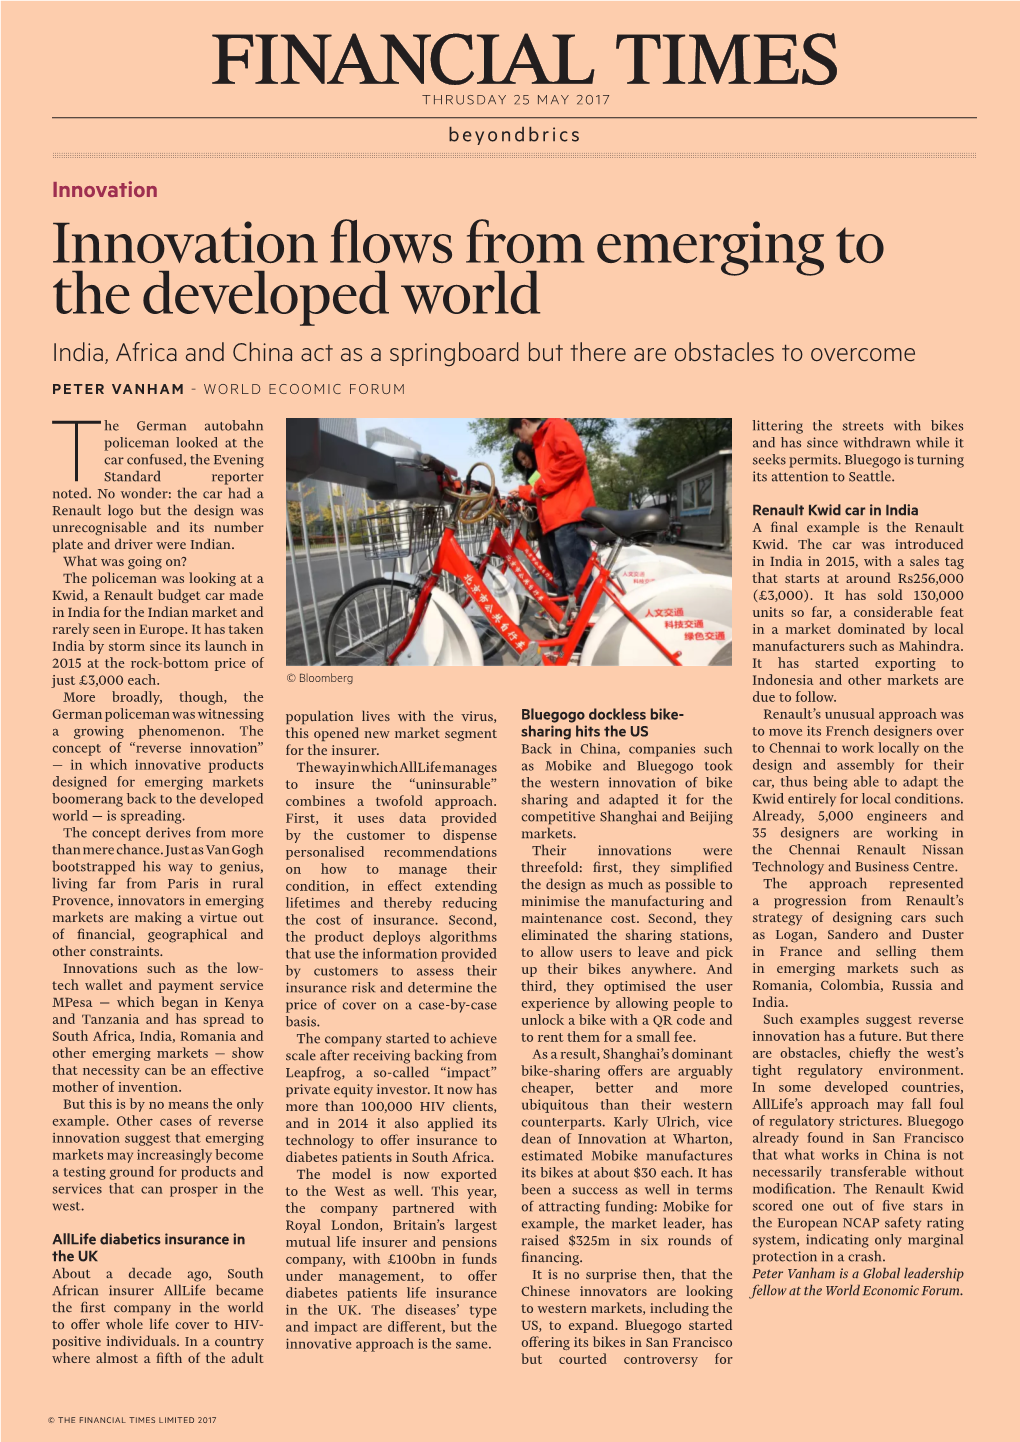 Innovation Flows from Emerging to the Developed World